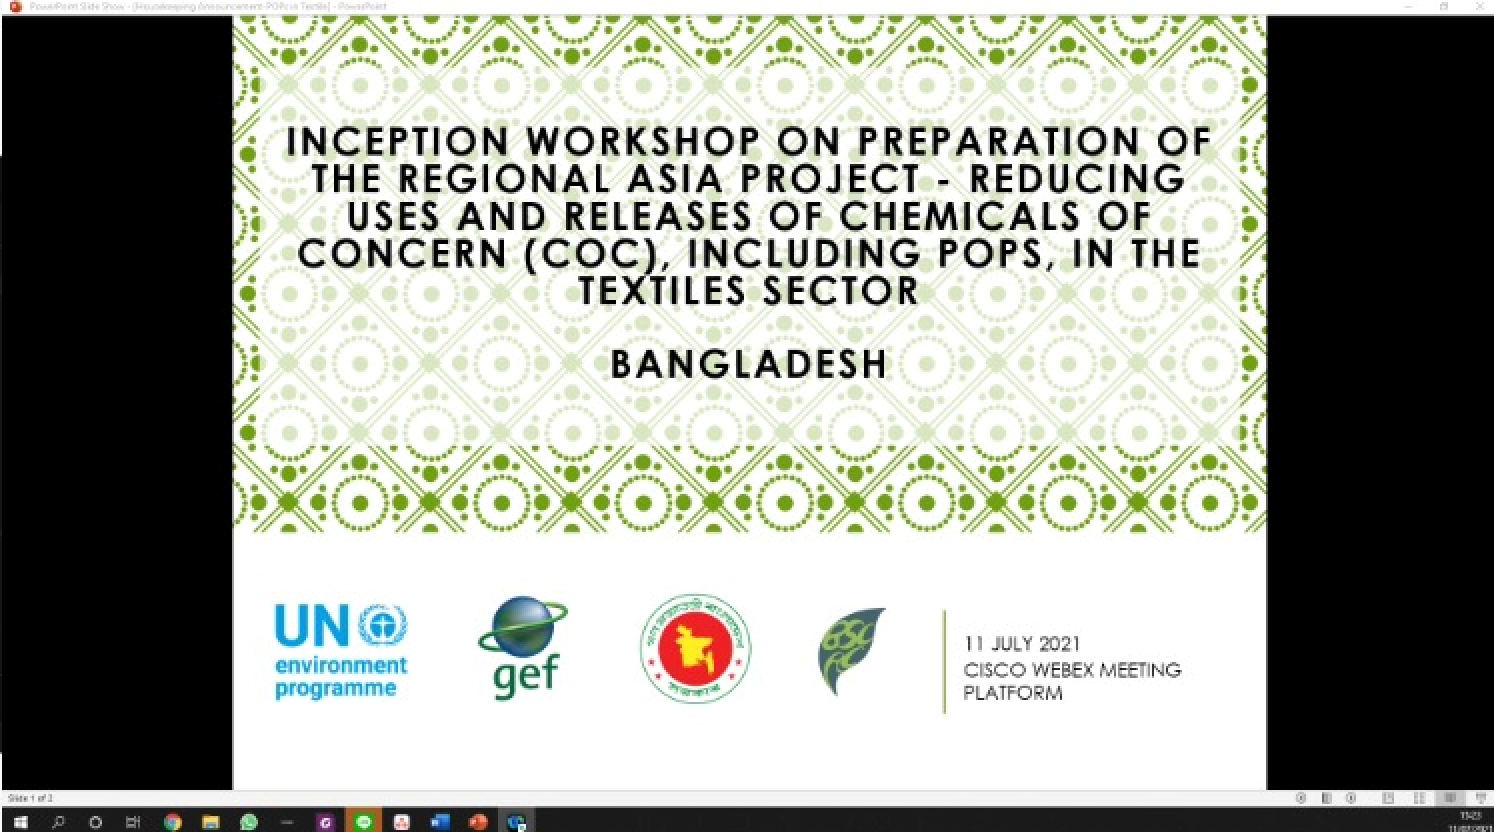 Reducing uses and releases of chemicals of concern, including POPs, in the textiles sector. National Meeting Bangladesh, 11 July 2021